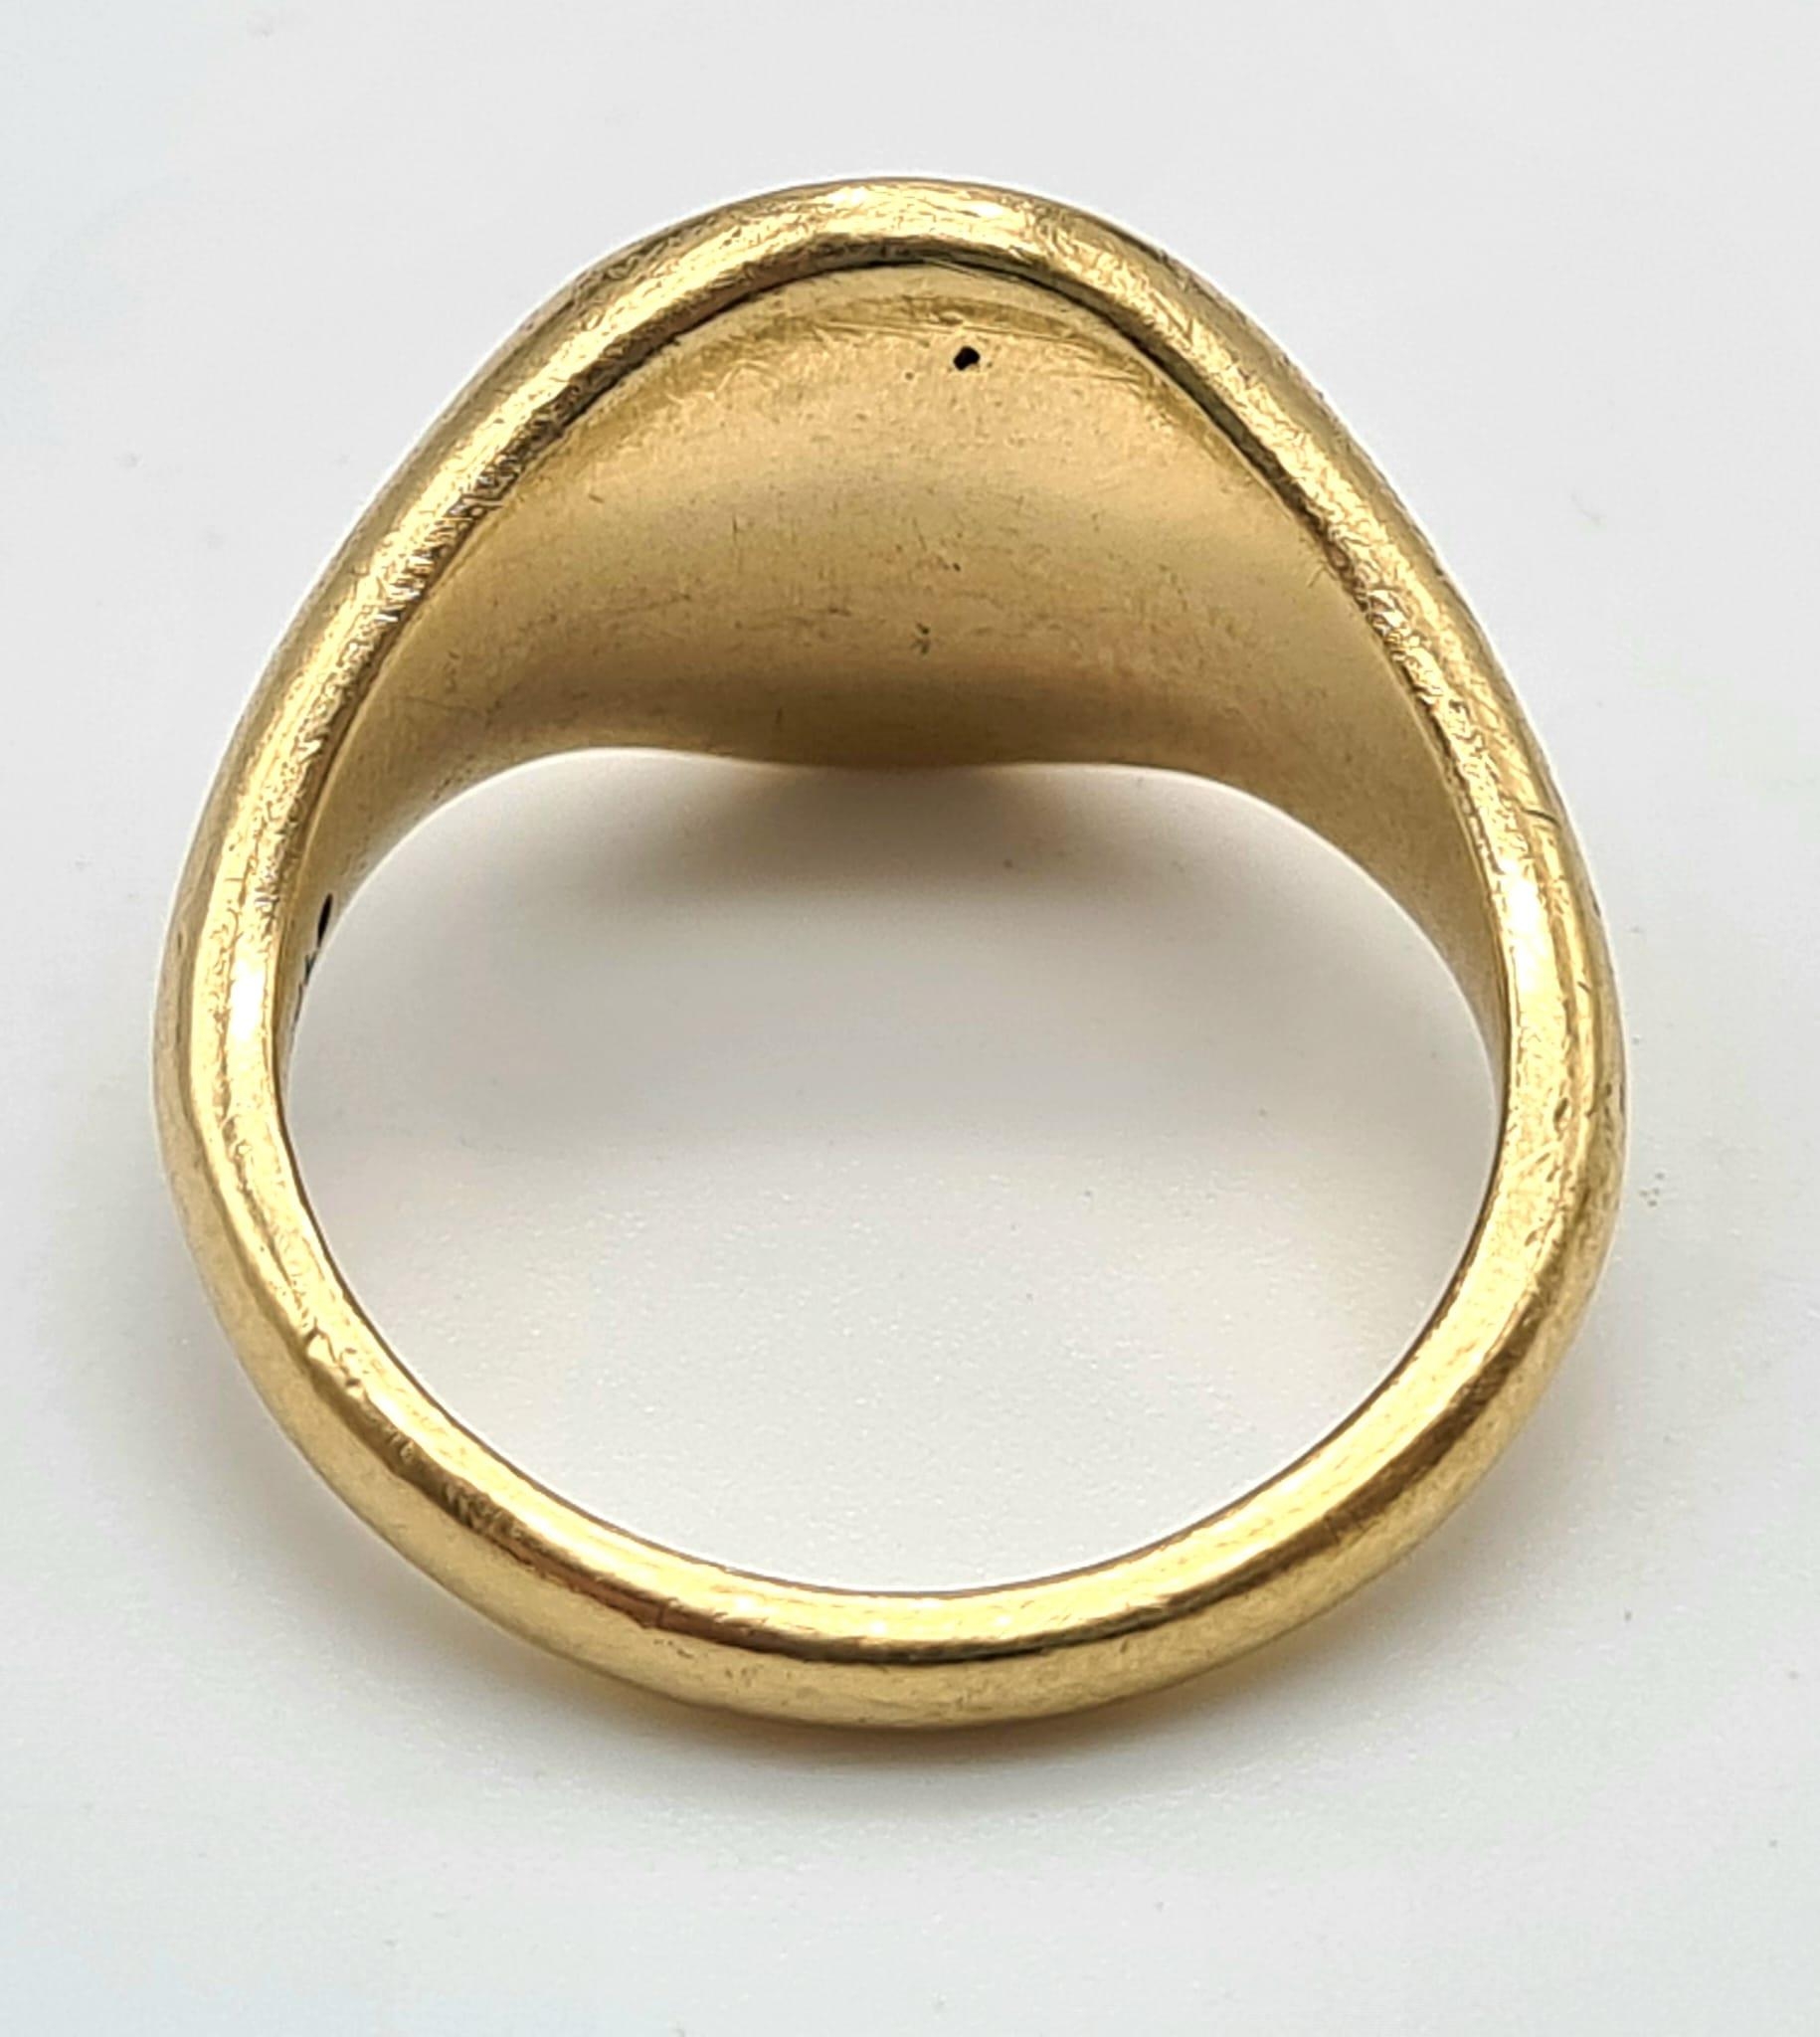 9K YELLOW GOLD SEAL SIGNET RING 10G SIZE R 1/2 - Image 3 of 5